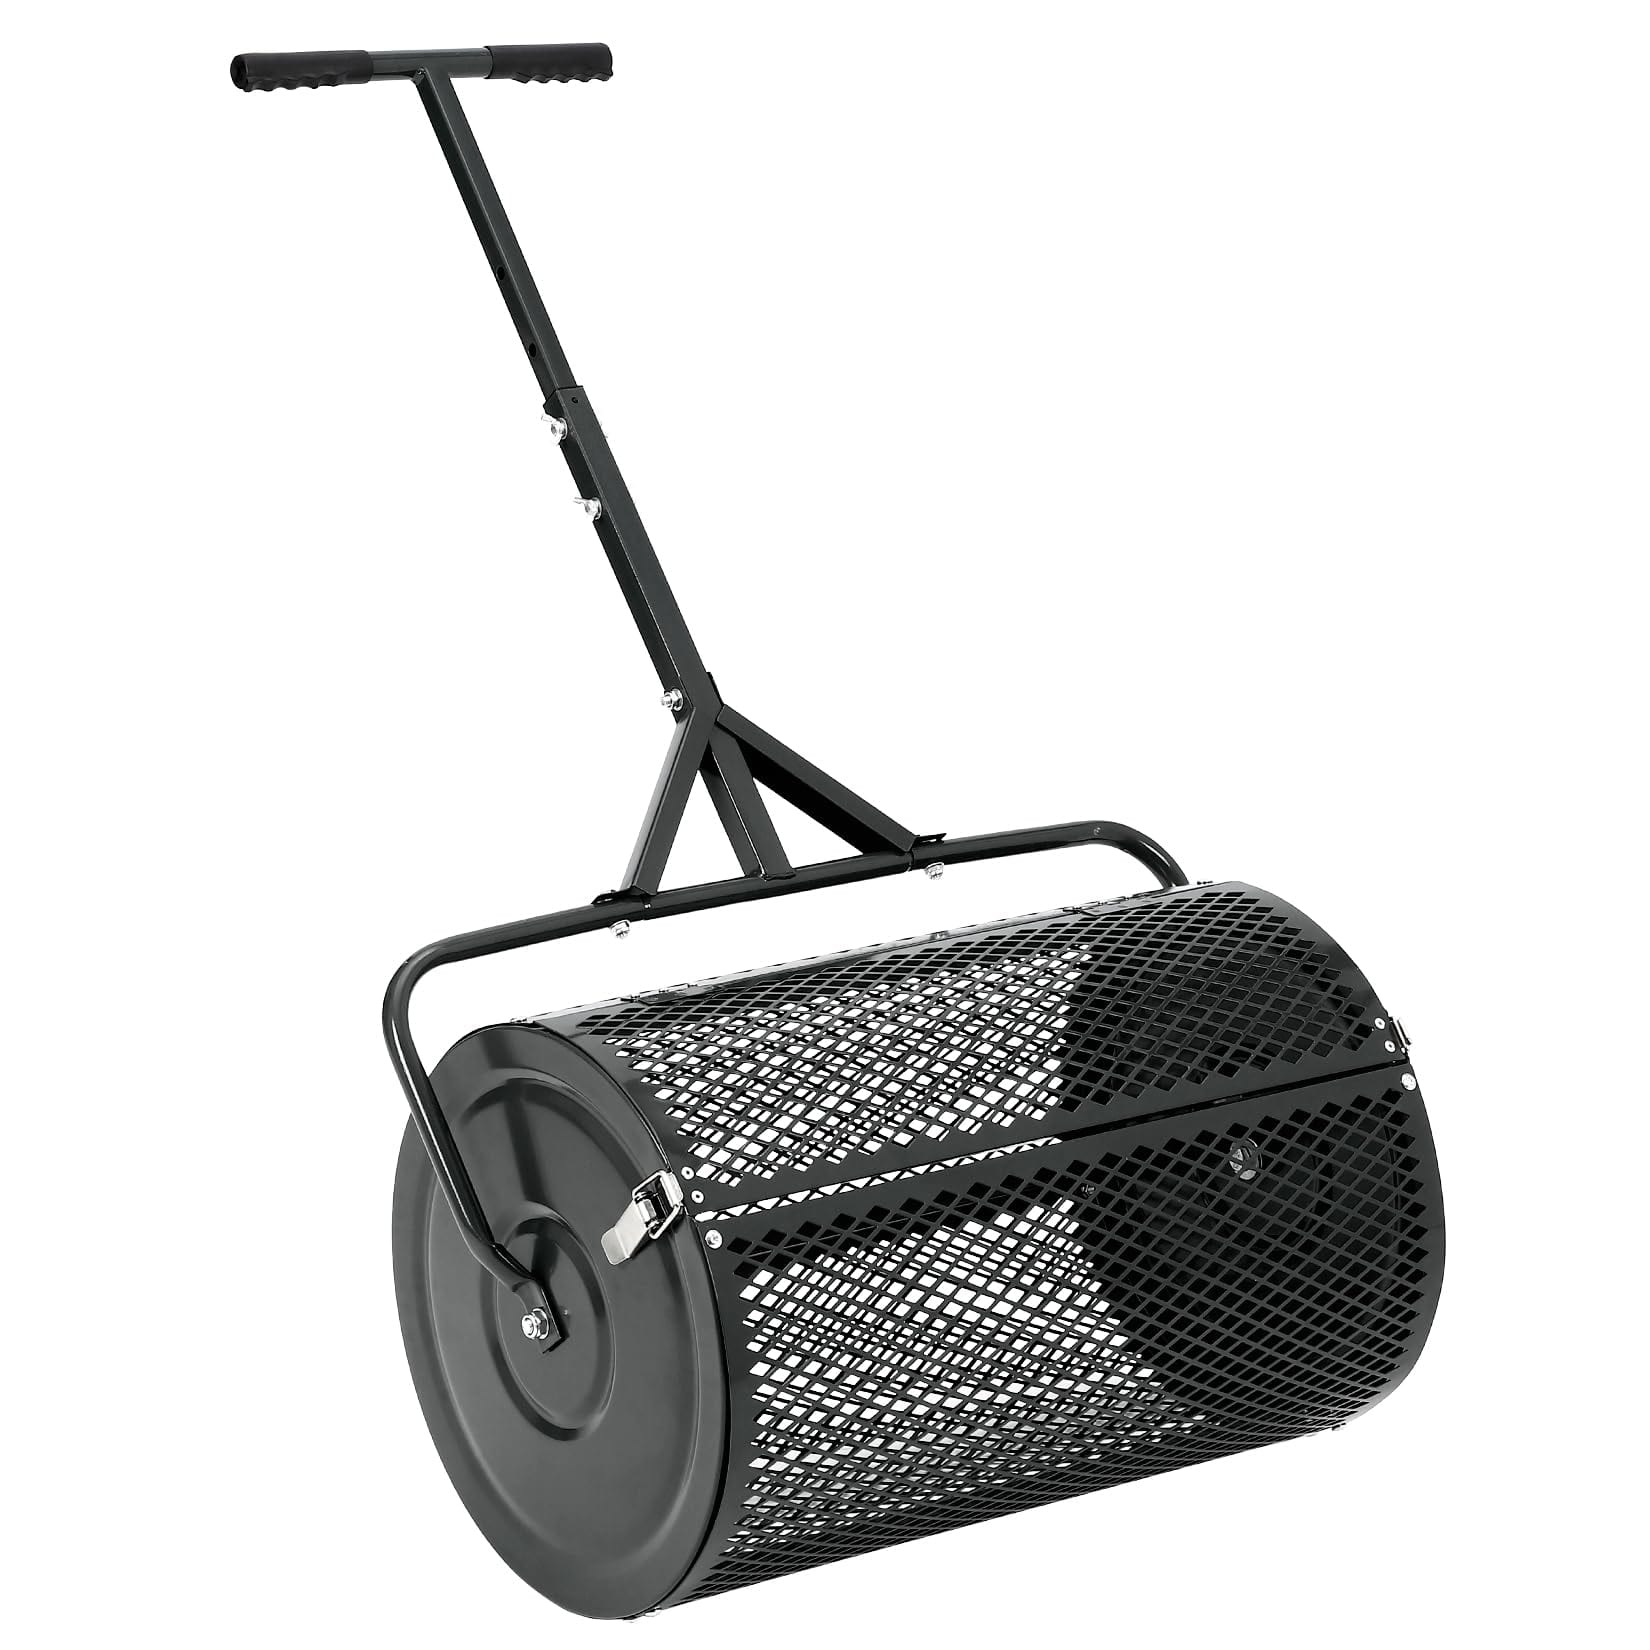 24 Inch Peat Moss Spreader with T Handle & Side Latches